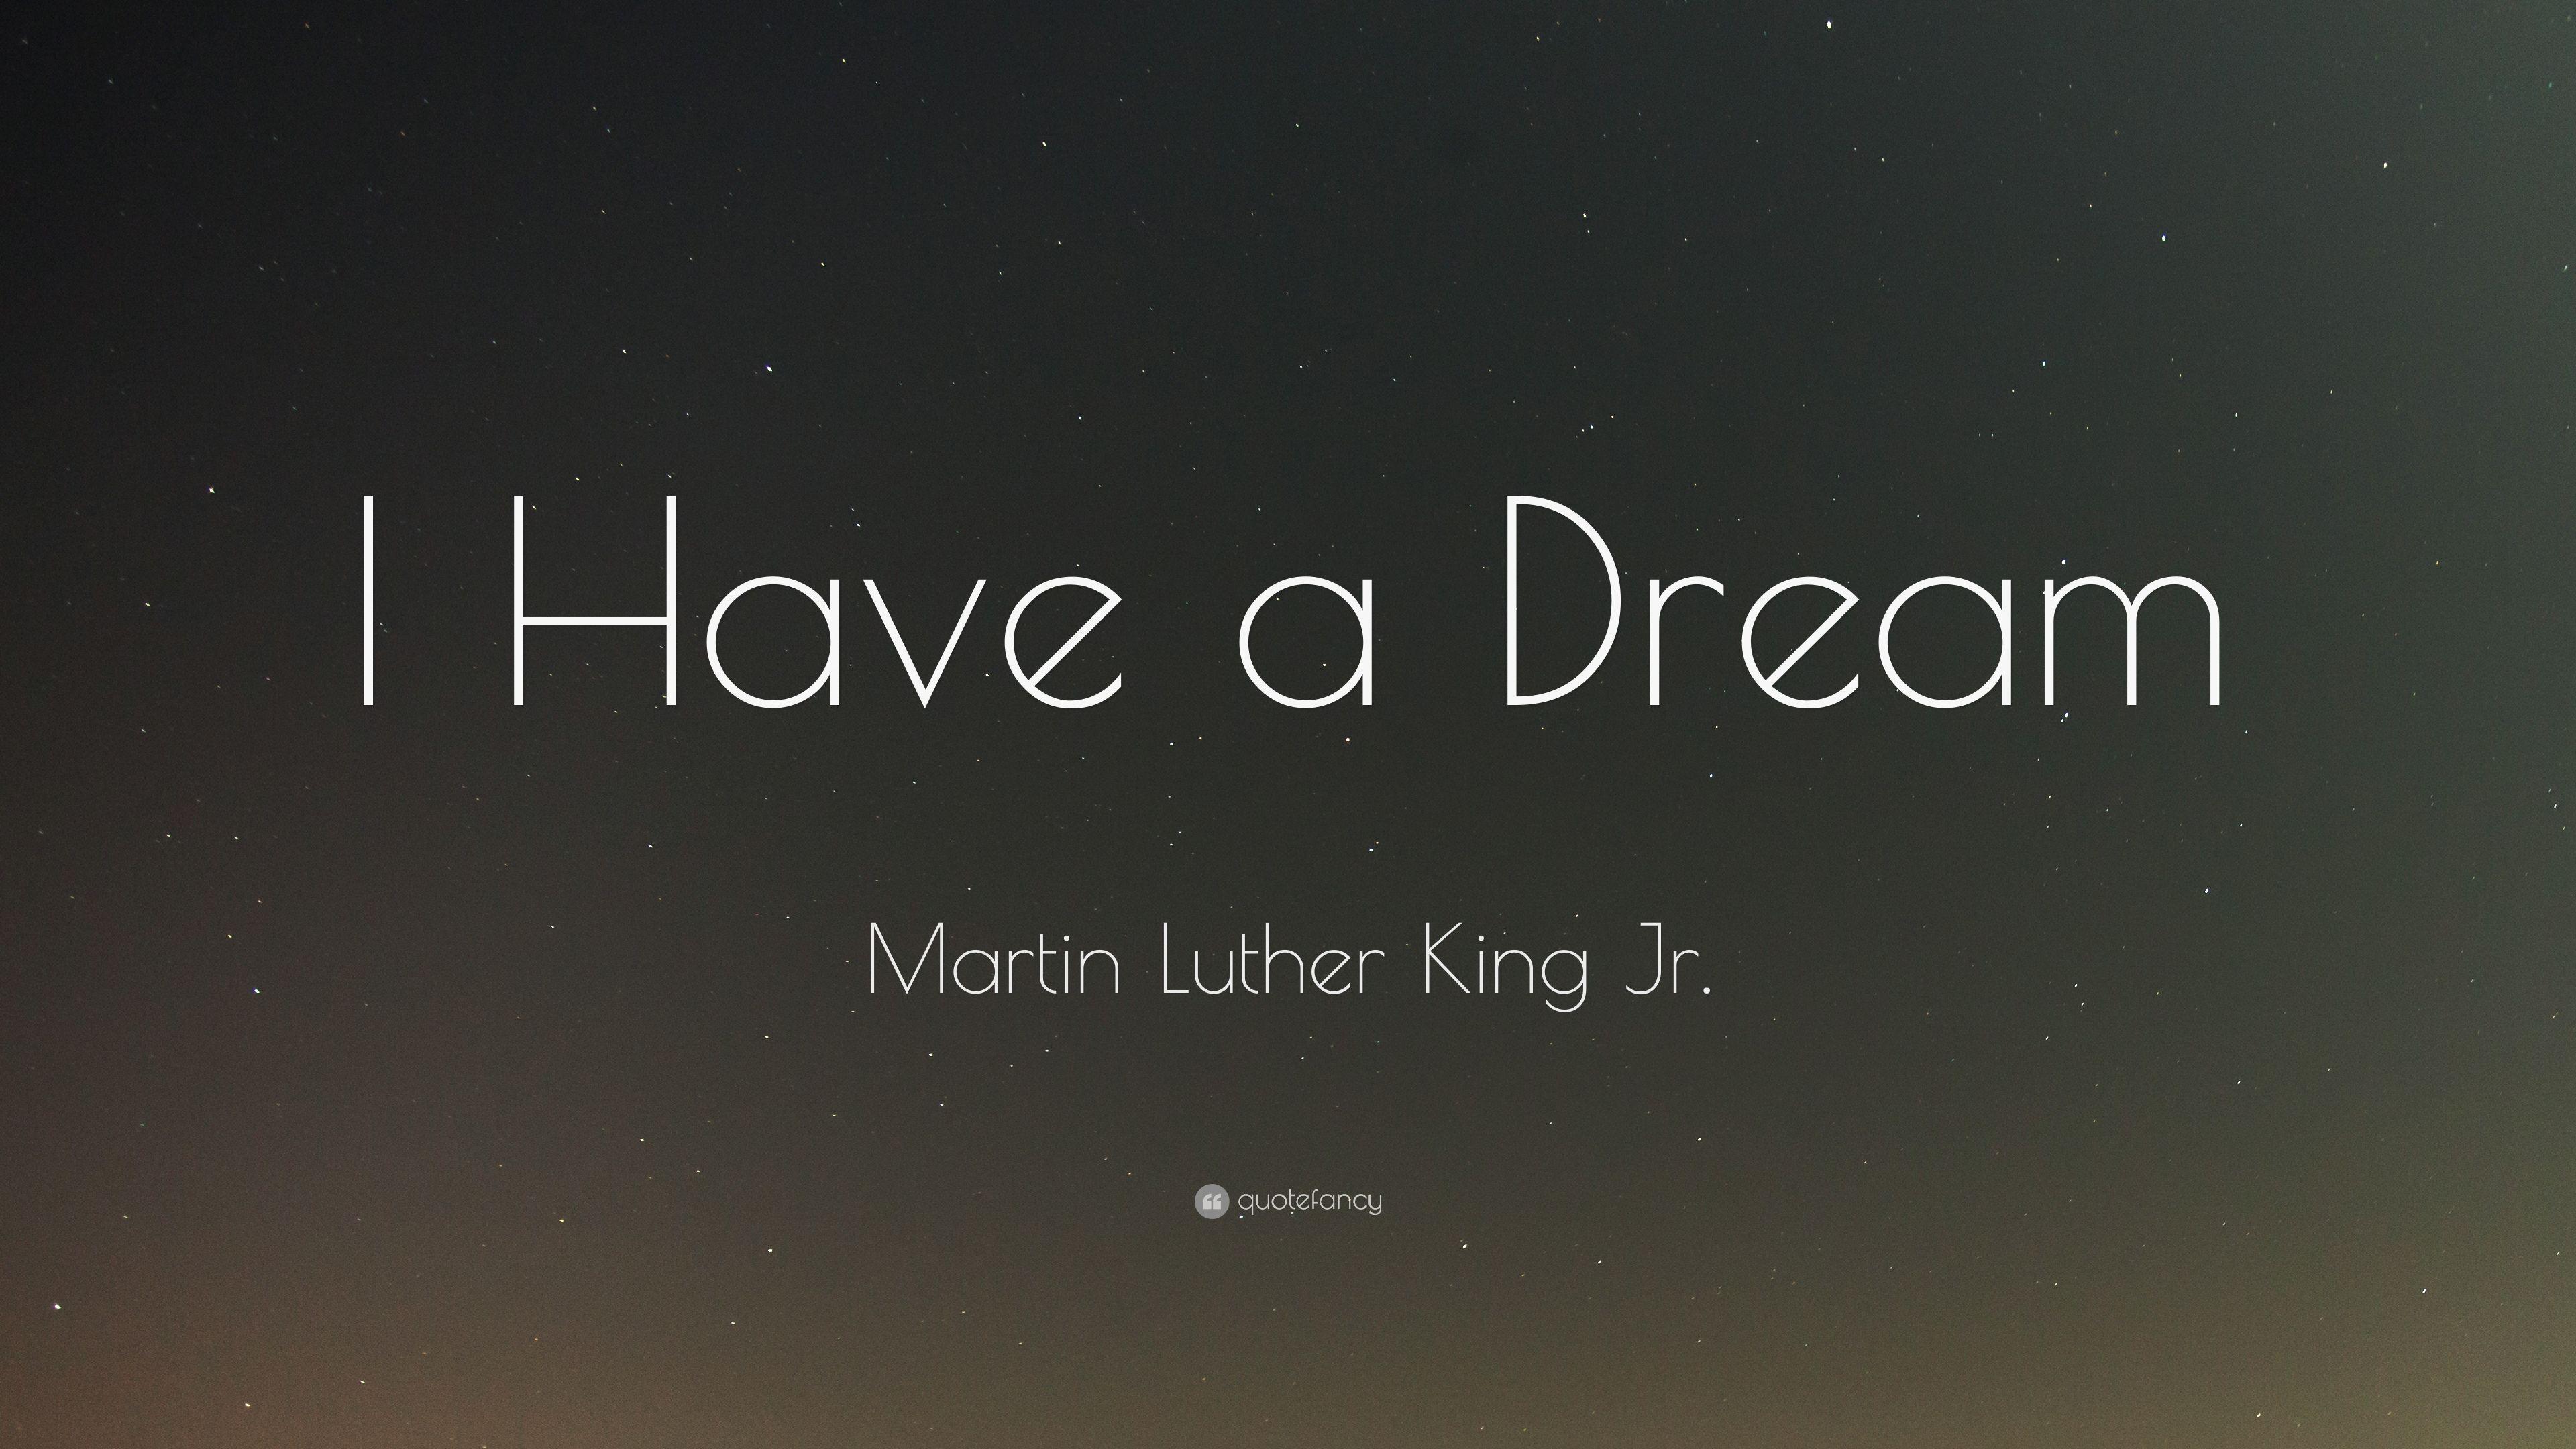 Martin Luther King Jr. Quote: “I Have a Dream” 19 wallpaper